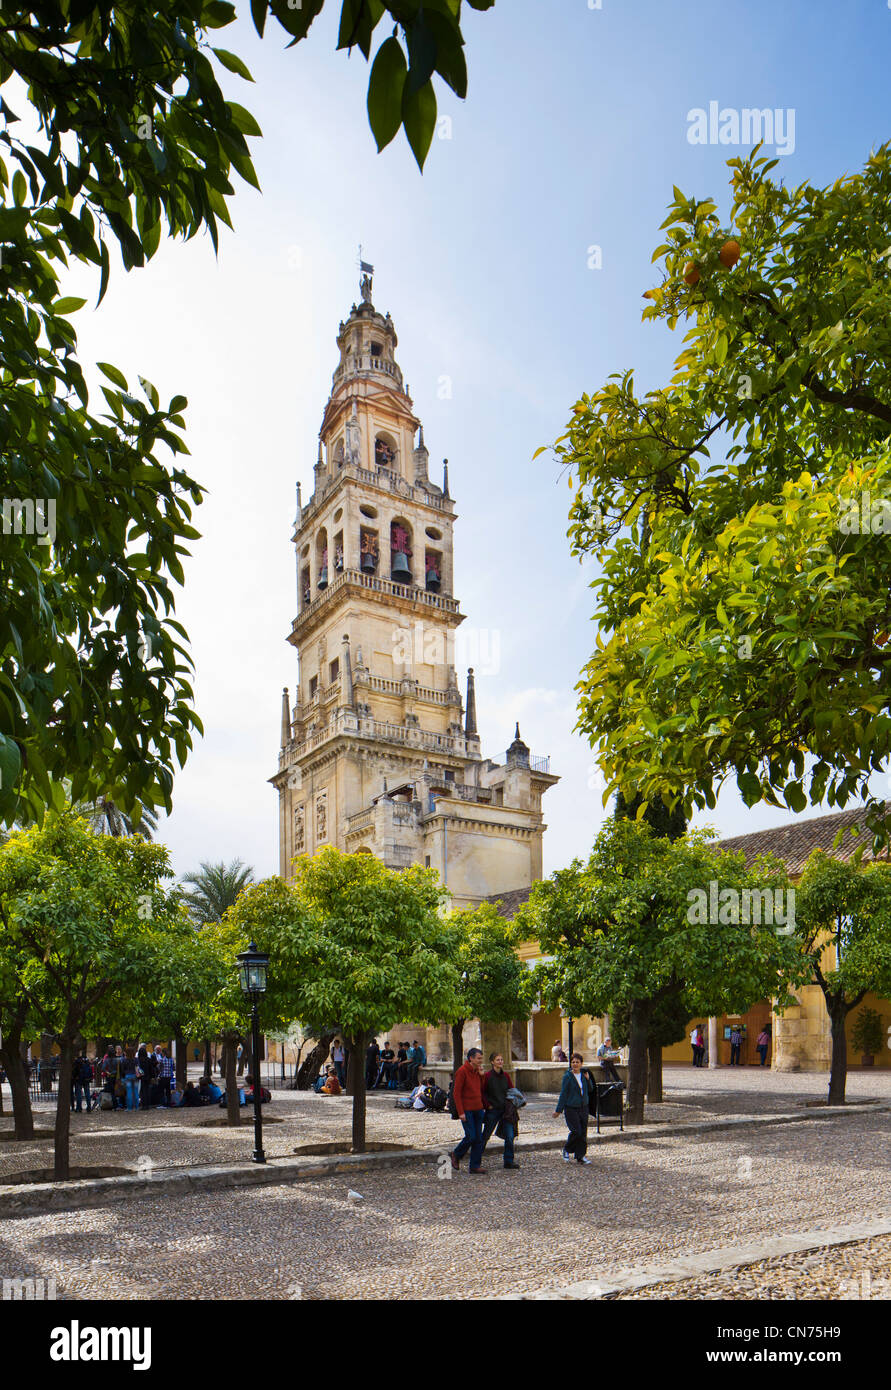 The Torre de Alminar and the Patio de los Naranjos in the grounds of the Mezquita (Cathedral-Mosque), Cordoba, Andalucia, Spain Stock Photo